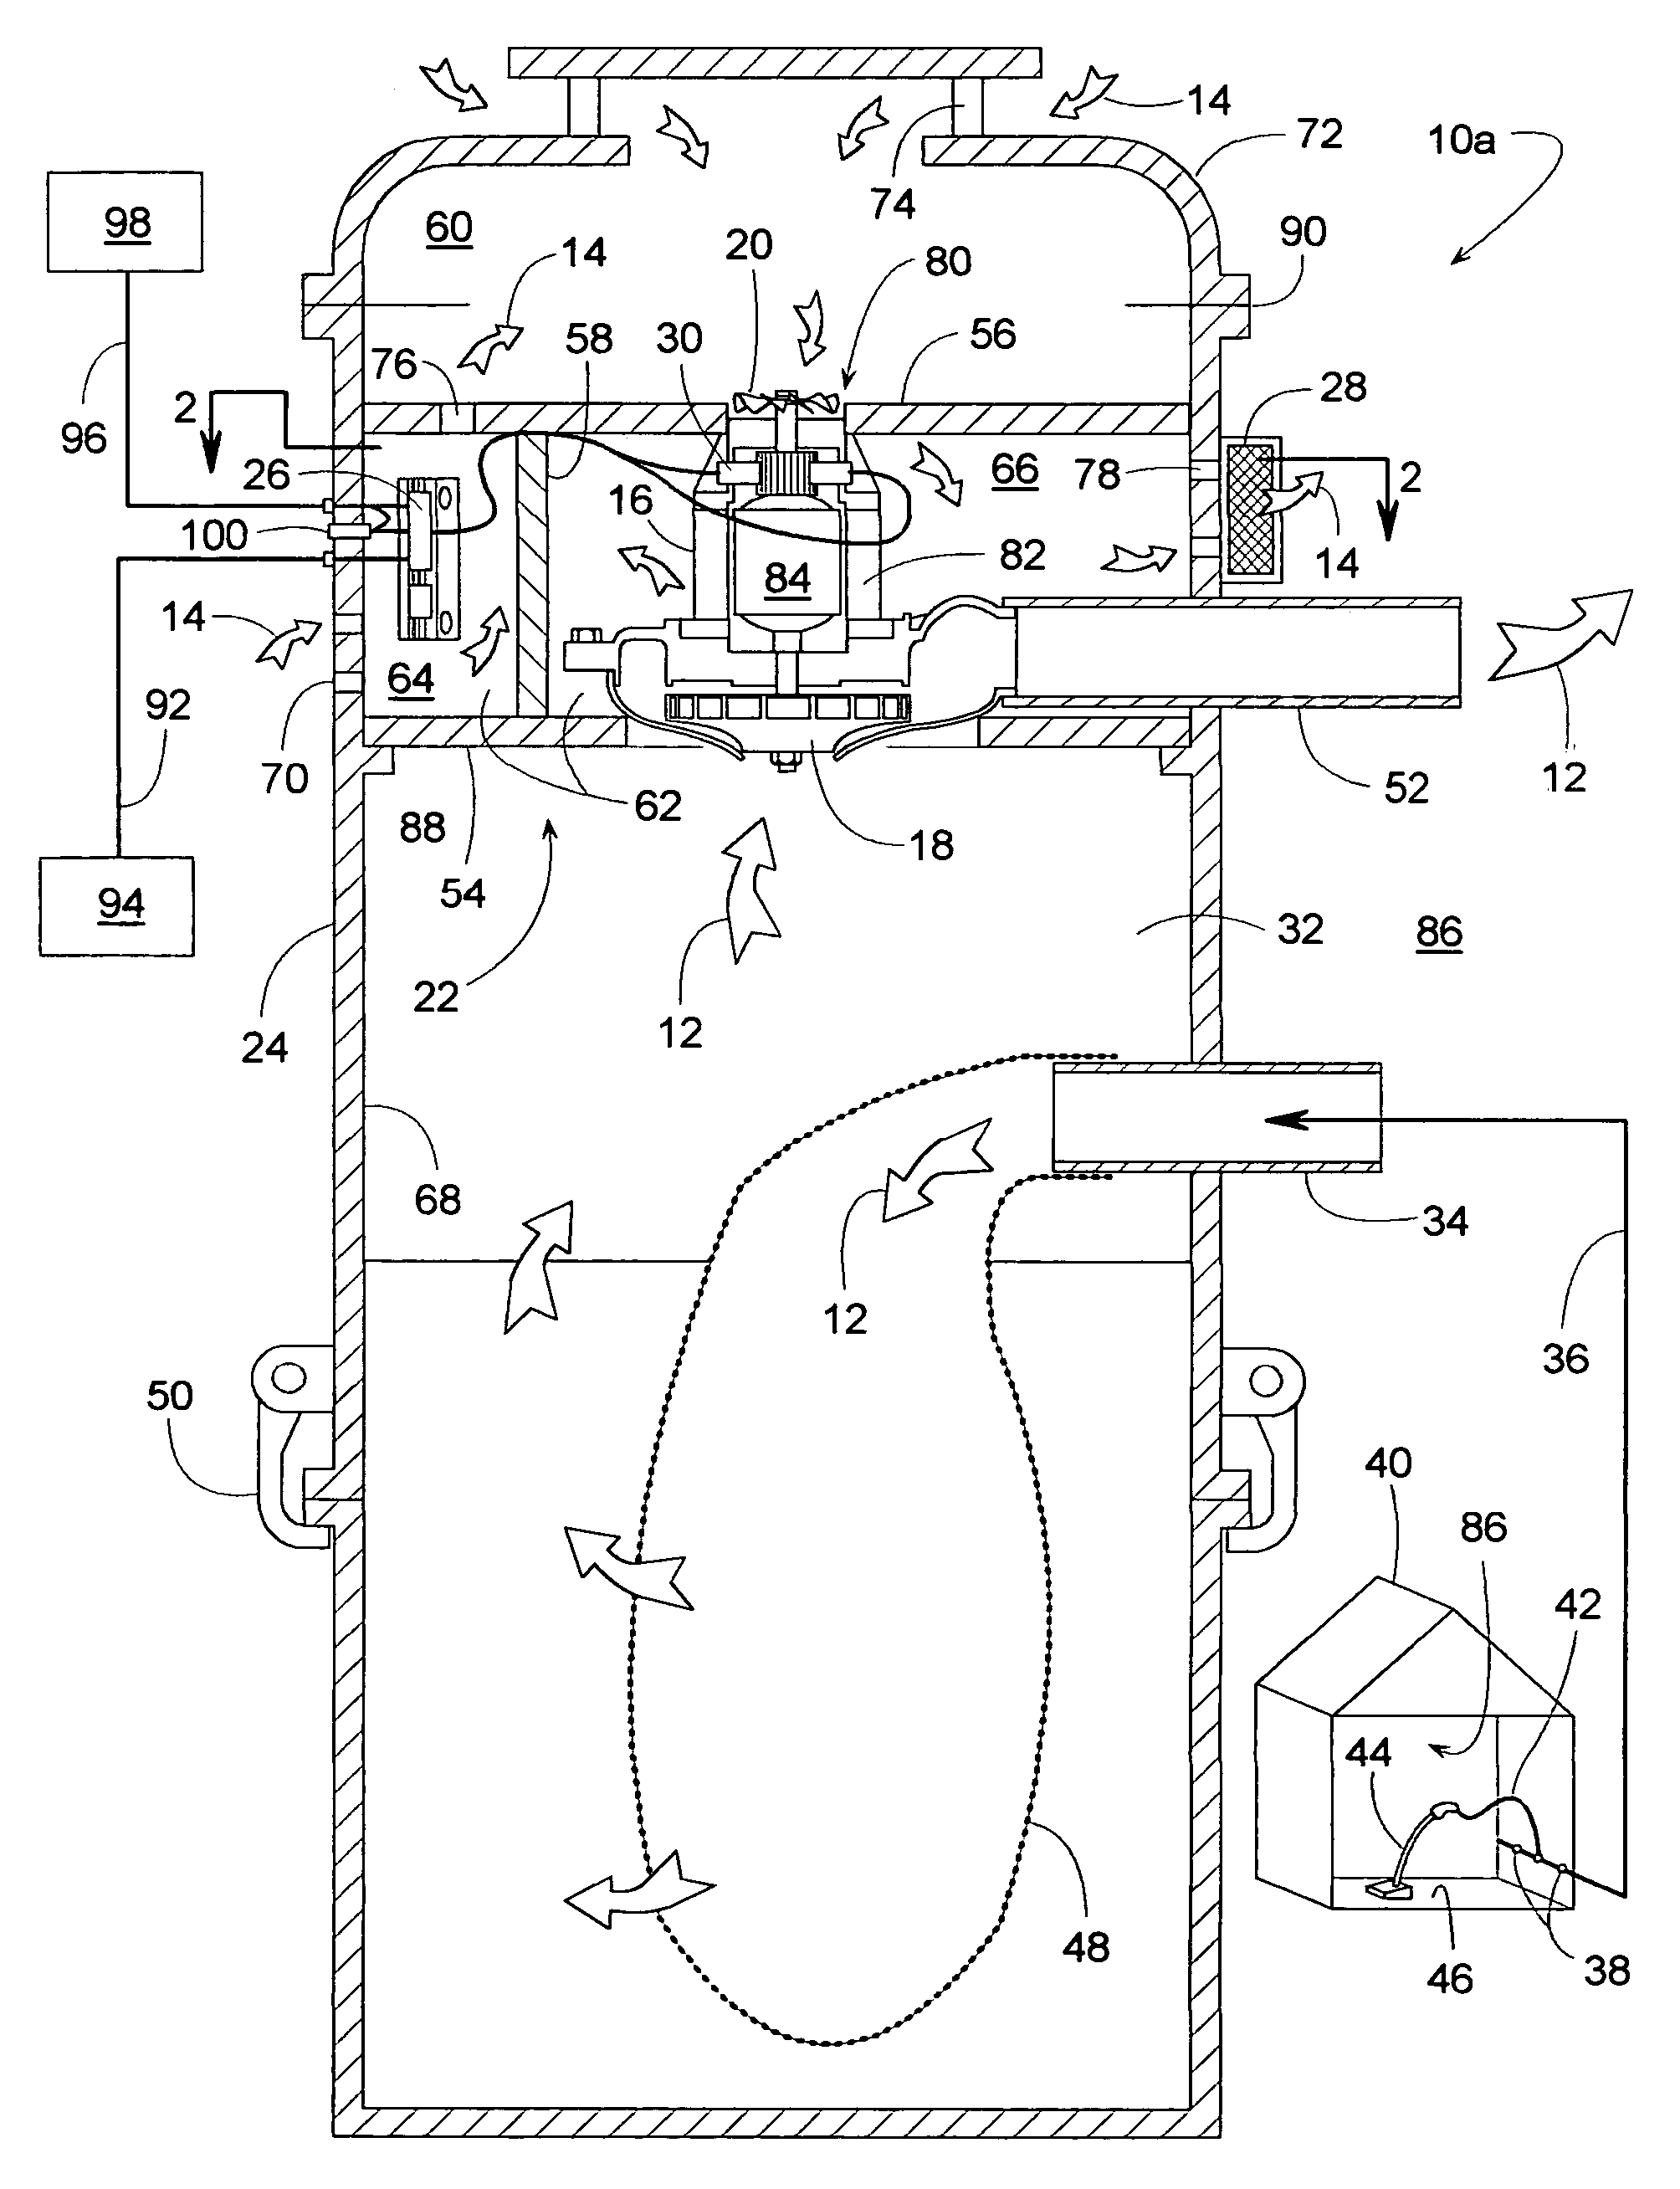 Central vacuum system with secondary airflow path